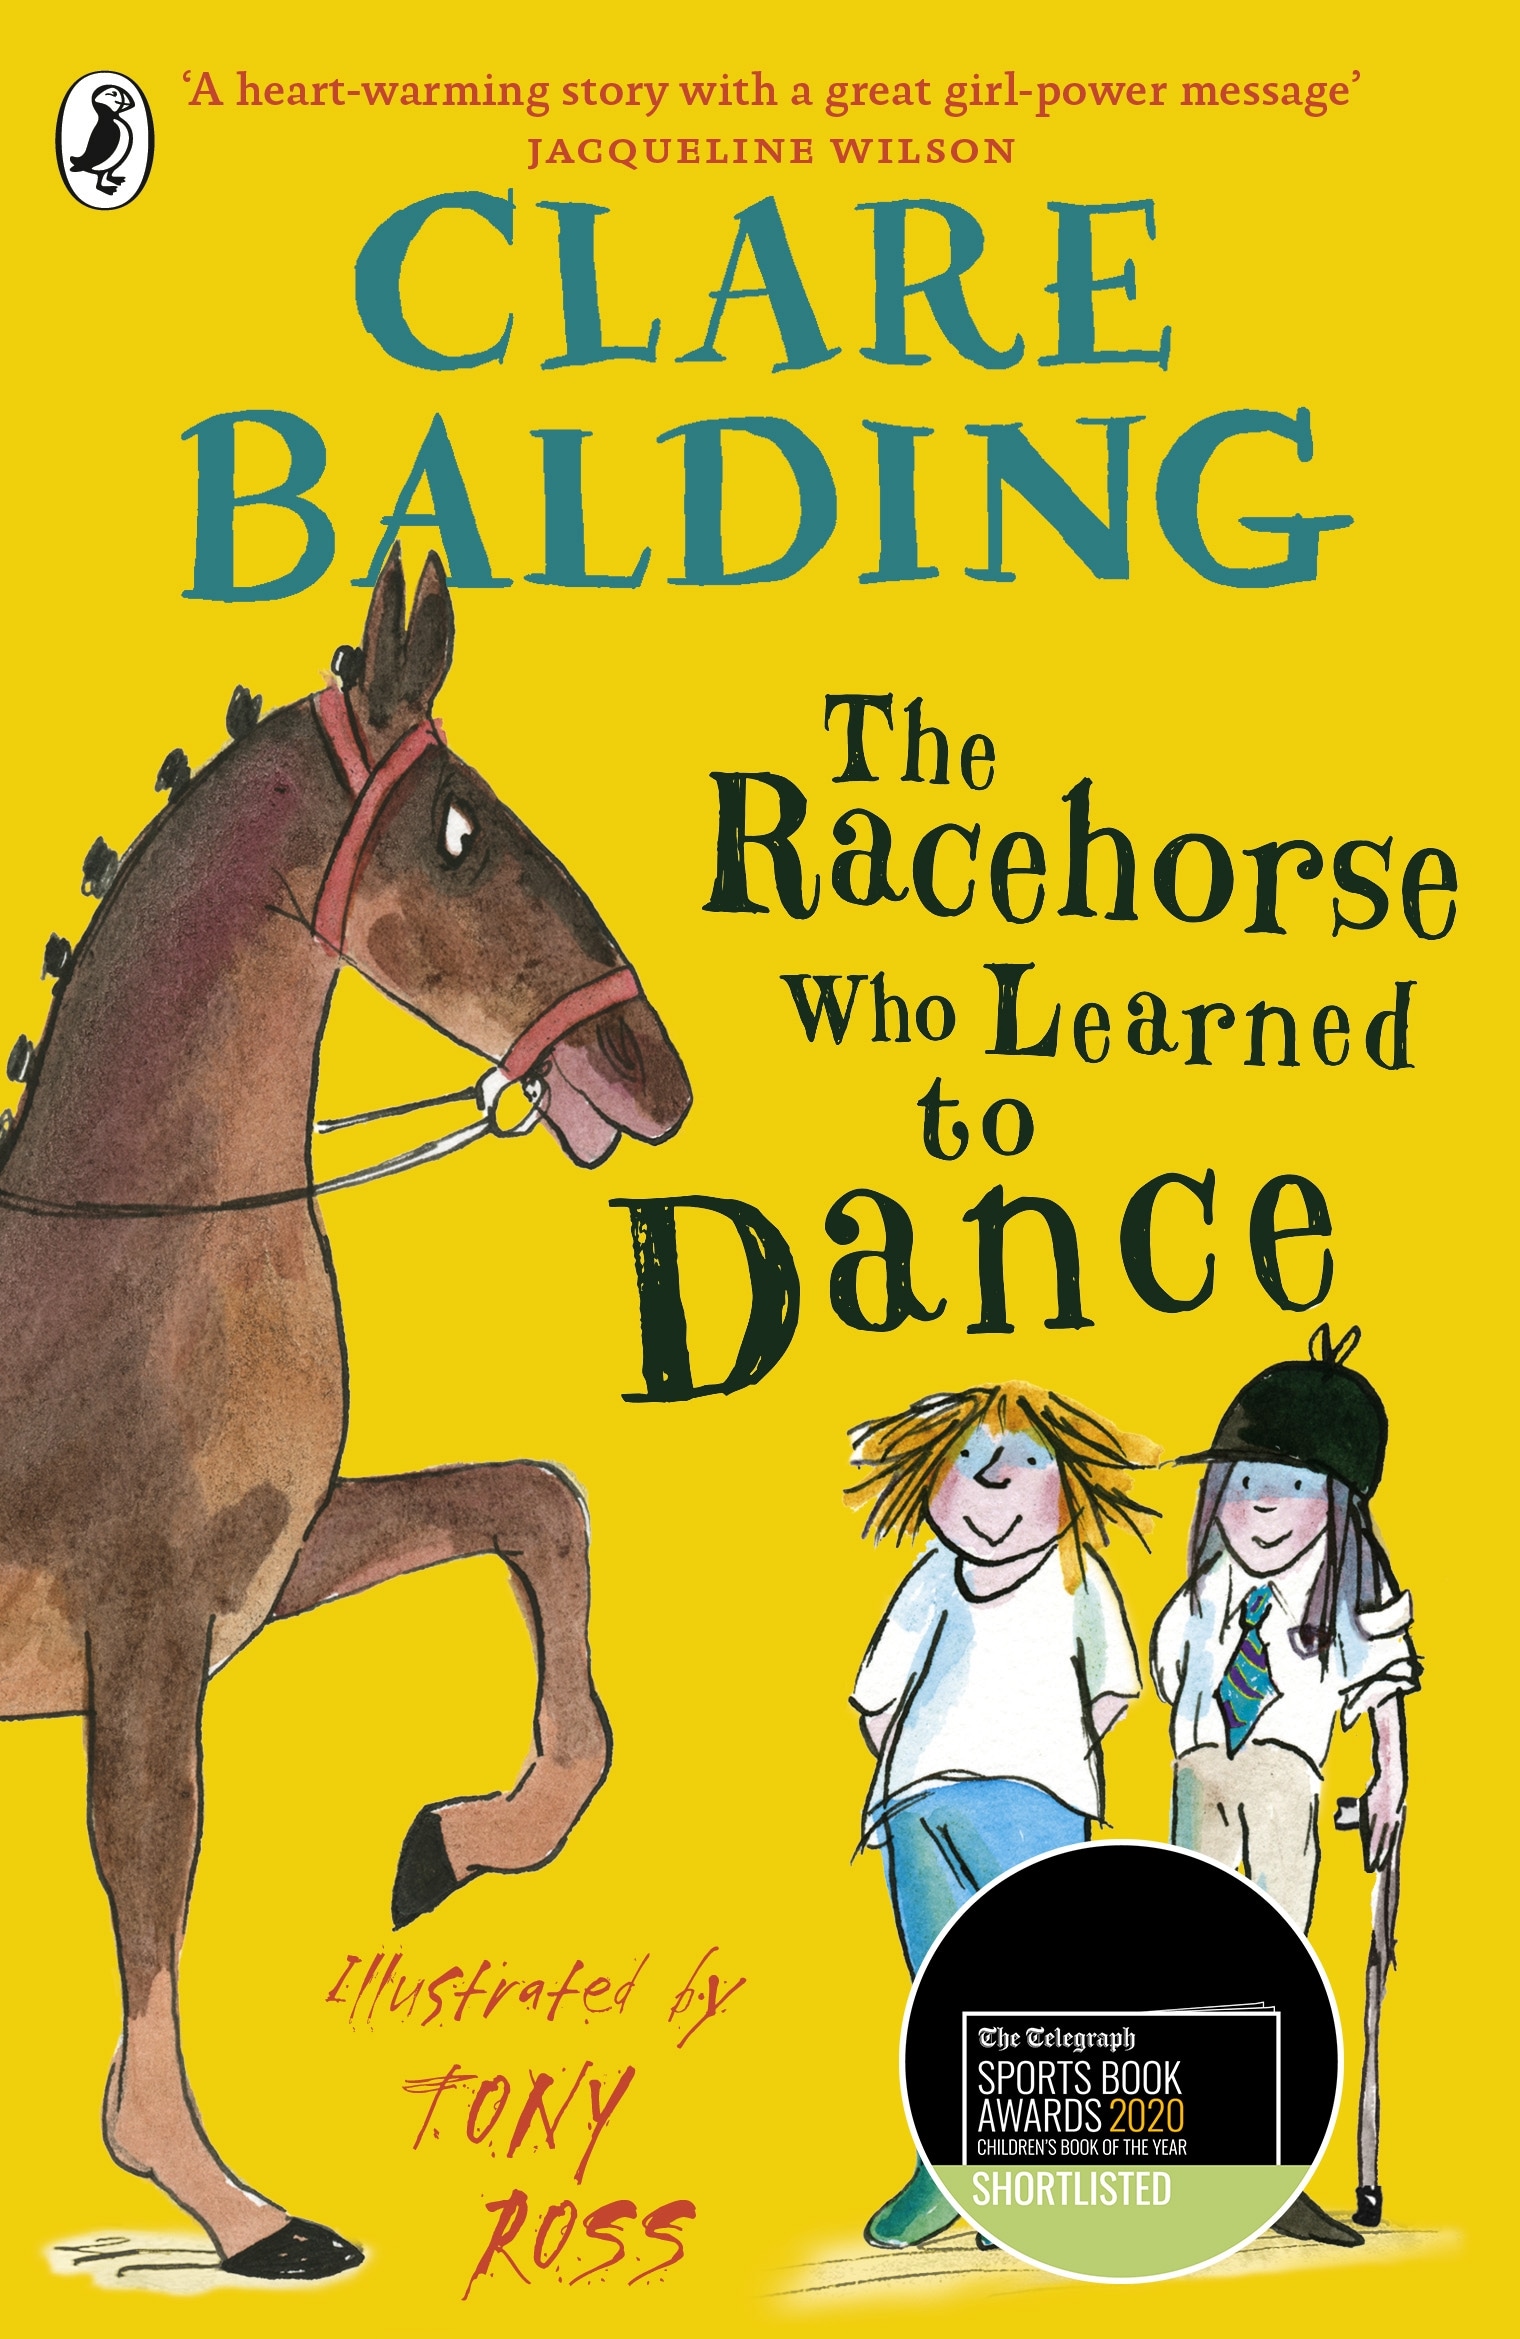 Book “The Racehorse Who Learned to Dance” by Clare Balding, Tony Ross — March 19, 2020